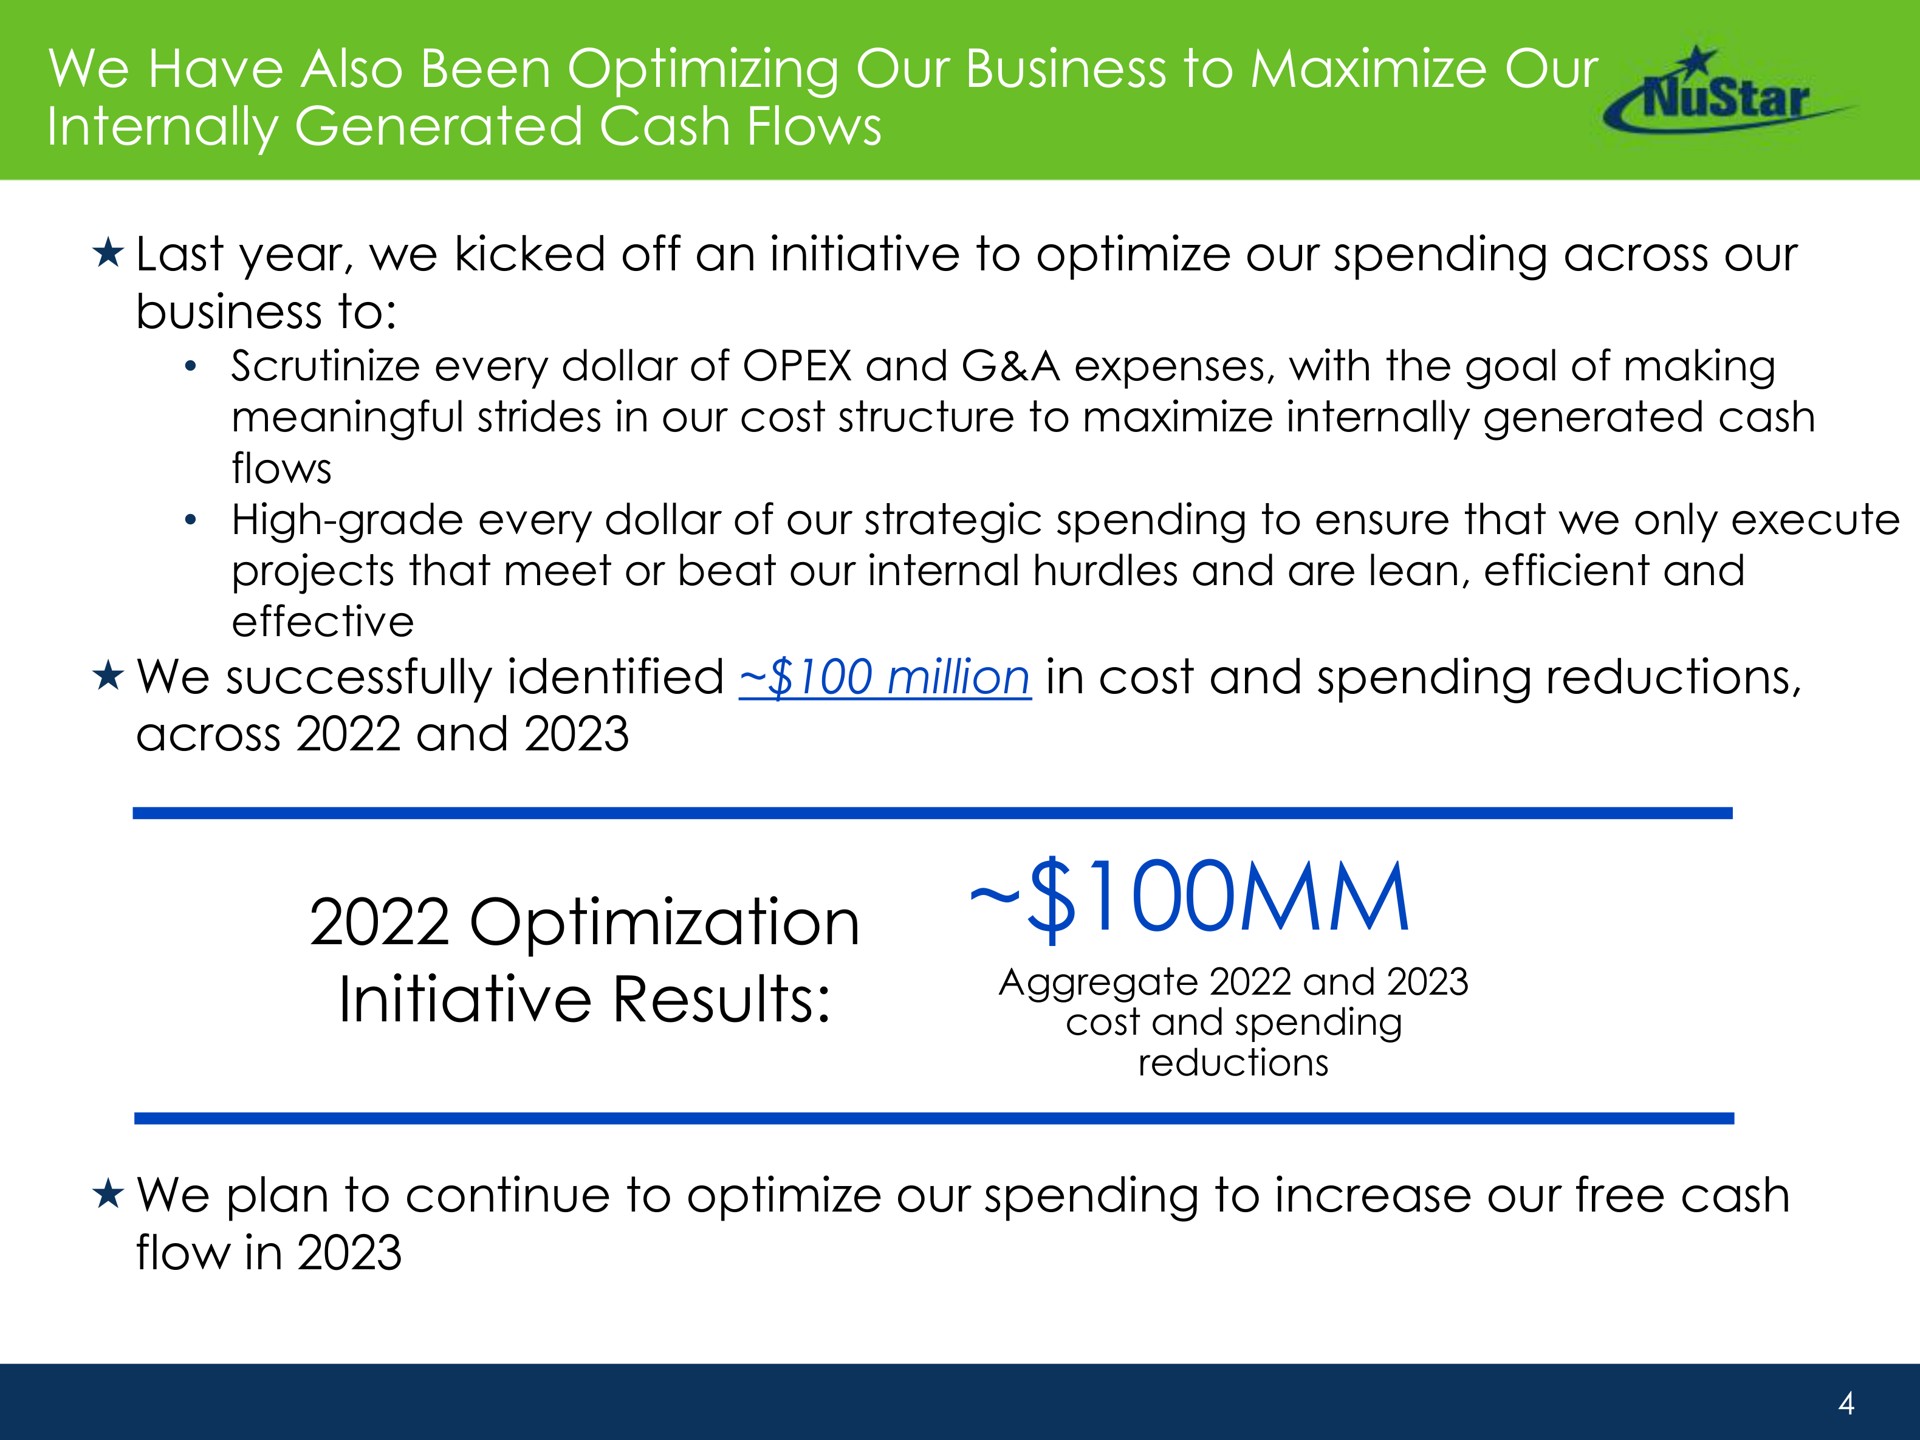 we have also been optimizing our business to maximize our internally generated cash flows last year we kicked off an initiative to optimize our spending across our business to we successfully identified million in cost and spending reductions across and optimization initiative results we plan to continue to optimize our spending to increase our free cash flow in projects that meet or beat internal hurdles are lean efficient | NuStar Energy